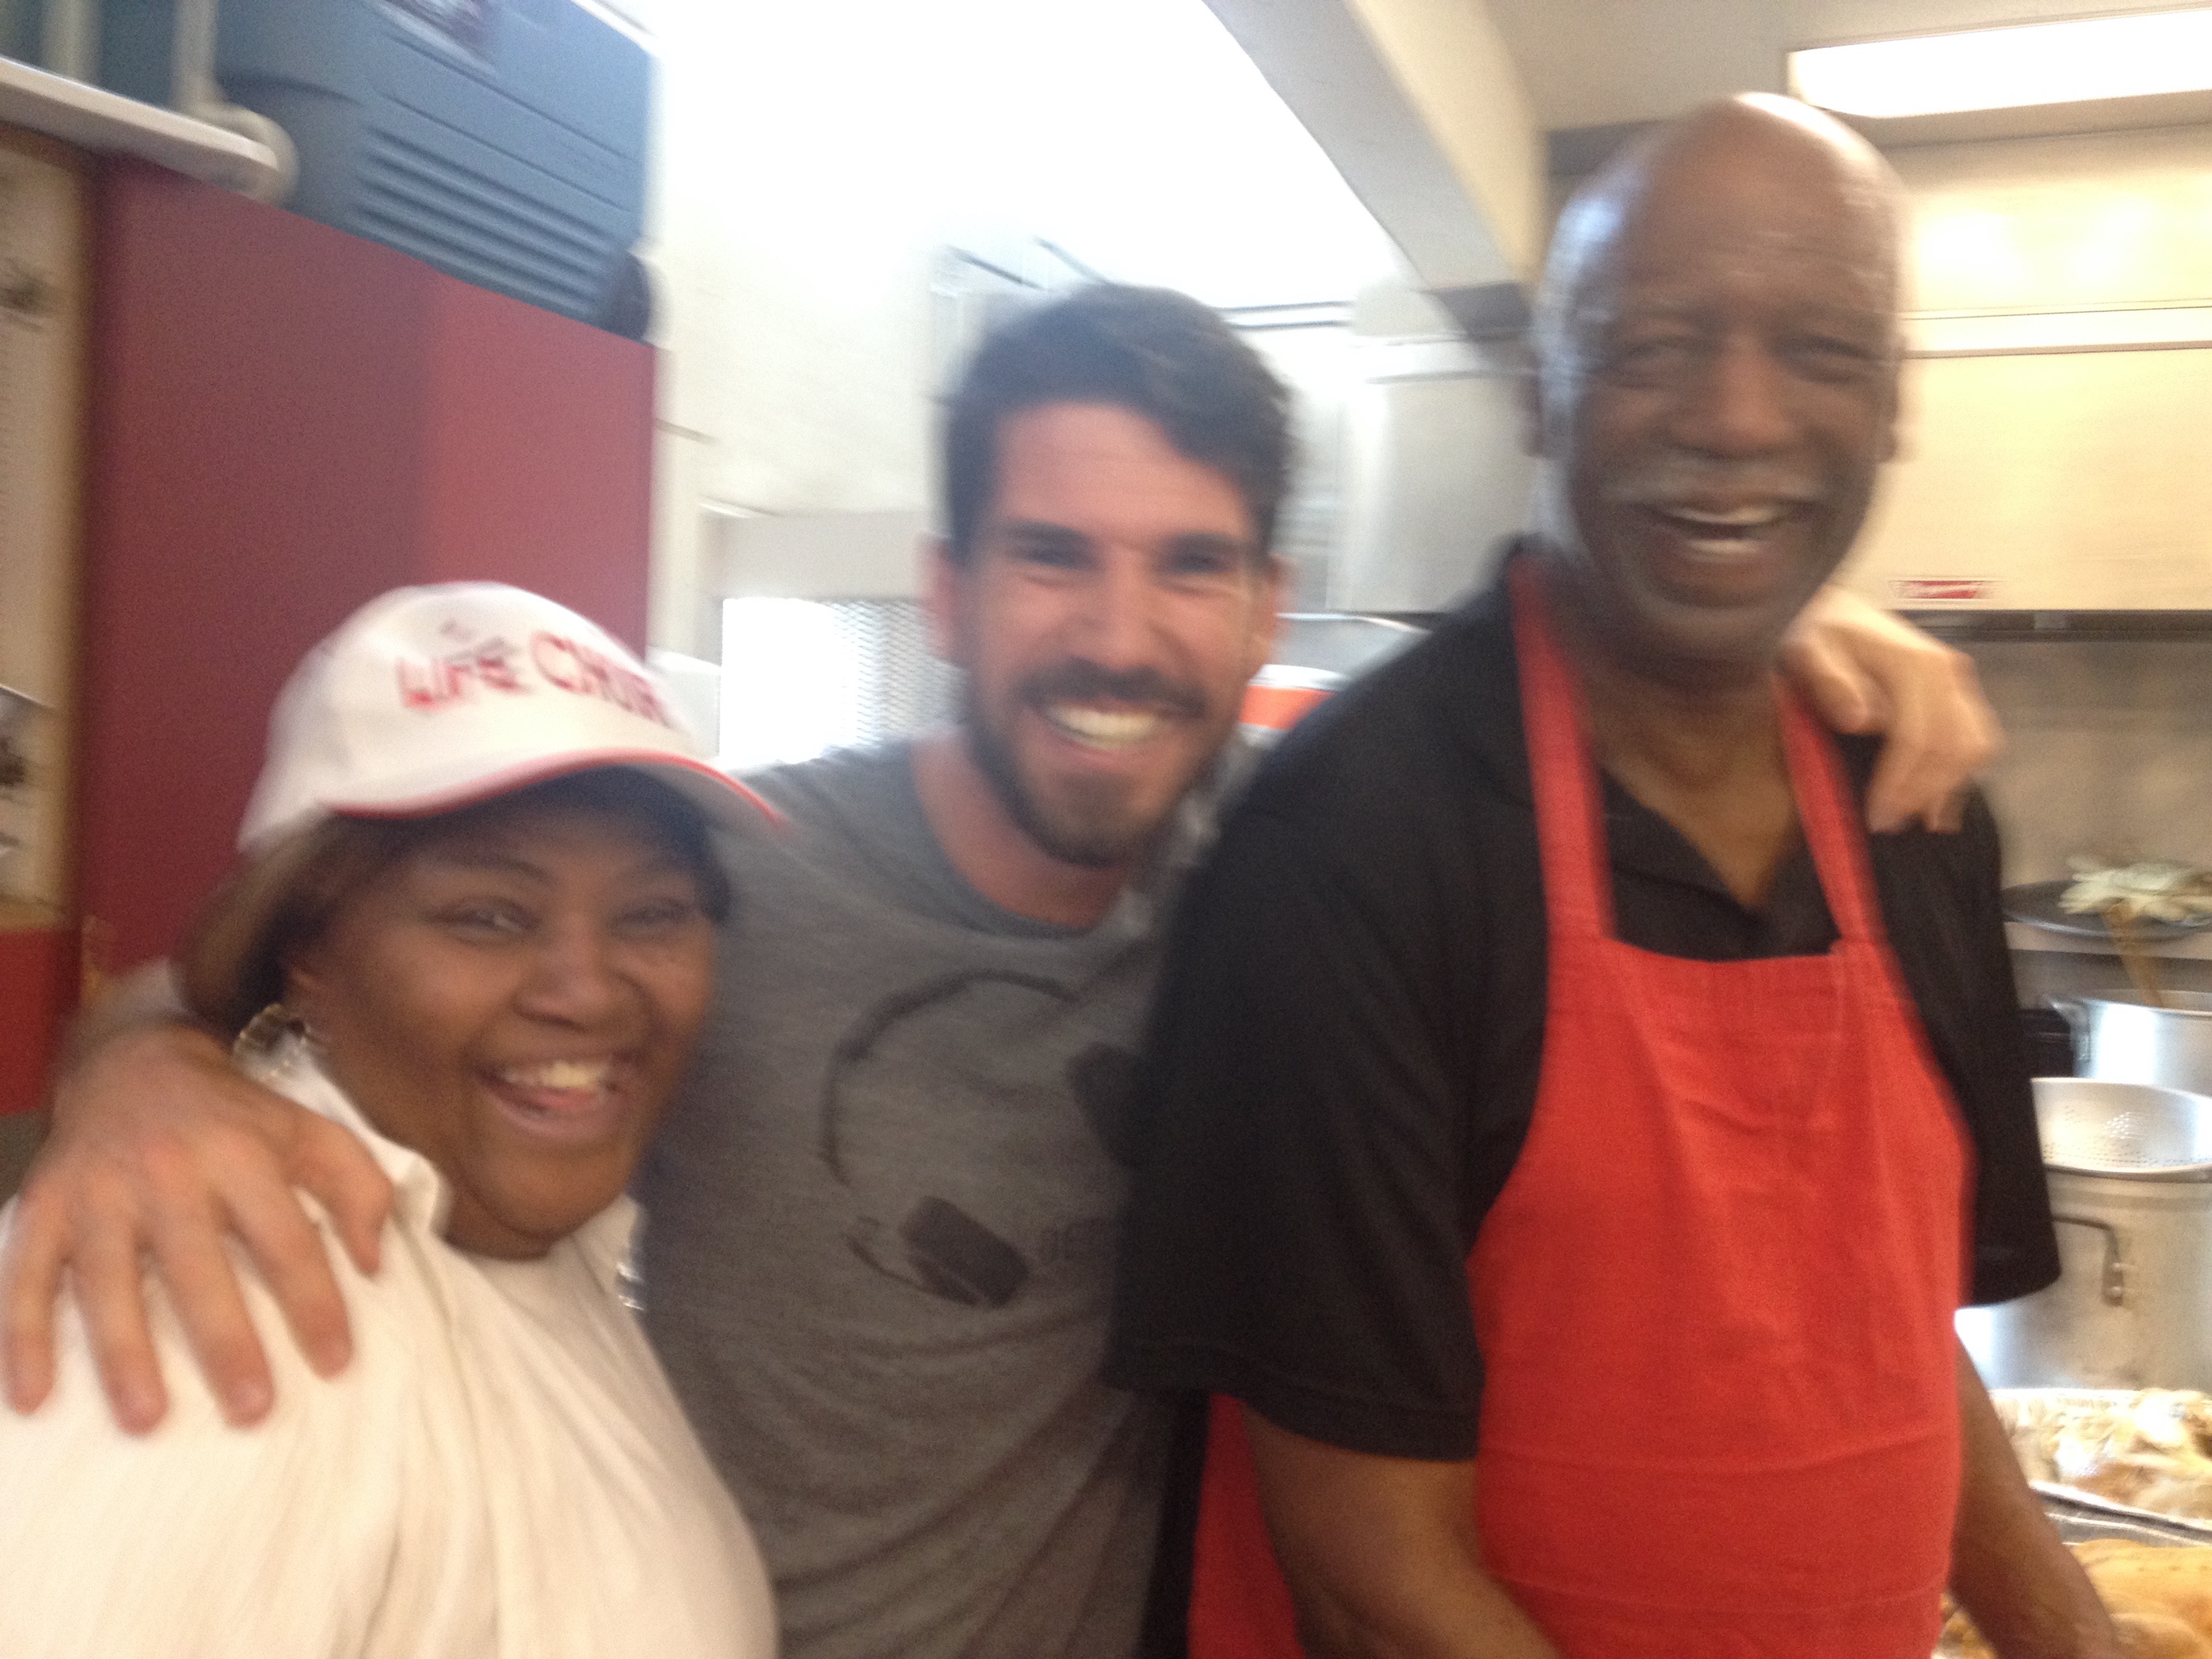 Actor luc mondelaers helping to feed the homeless in LA with his charity organisation cherry tea